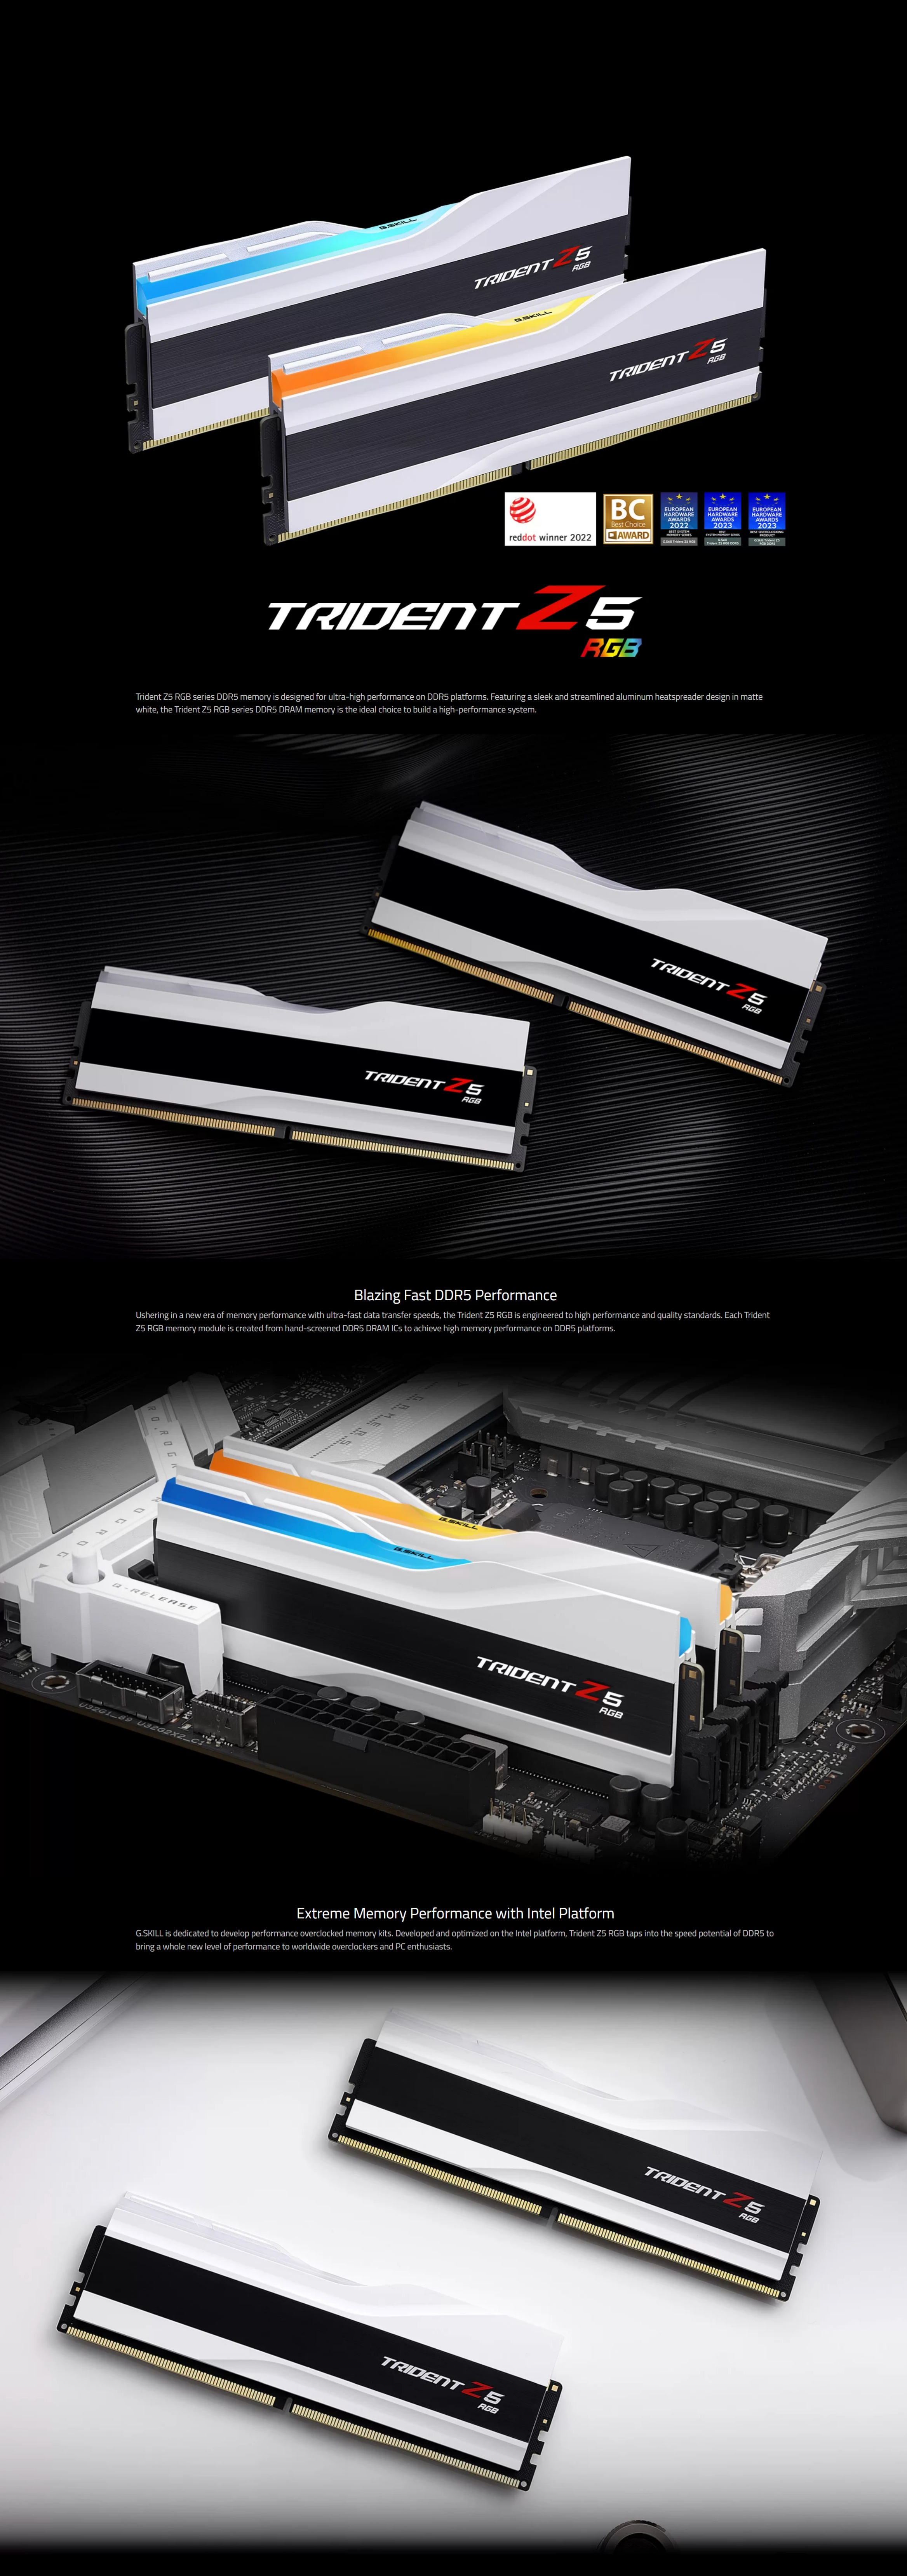 A large marketing image providing additional information about the product G.Skill 48GB Kit (2x 24GB) DDR5 Trident Z5 RGB CL40 8400MHz- Silver - Additional alt info not provided